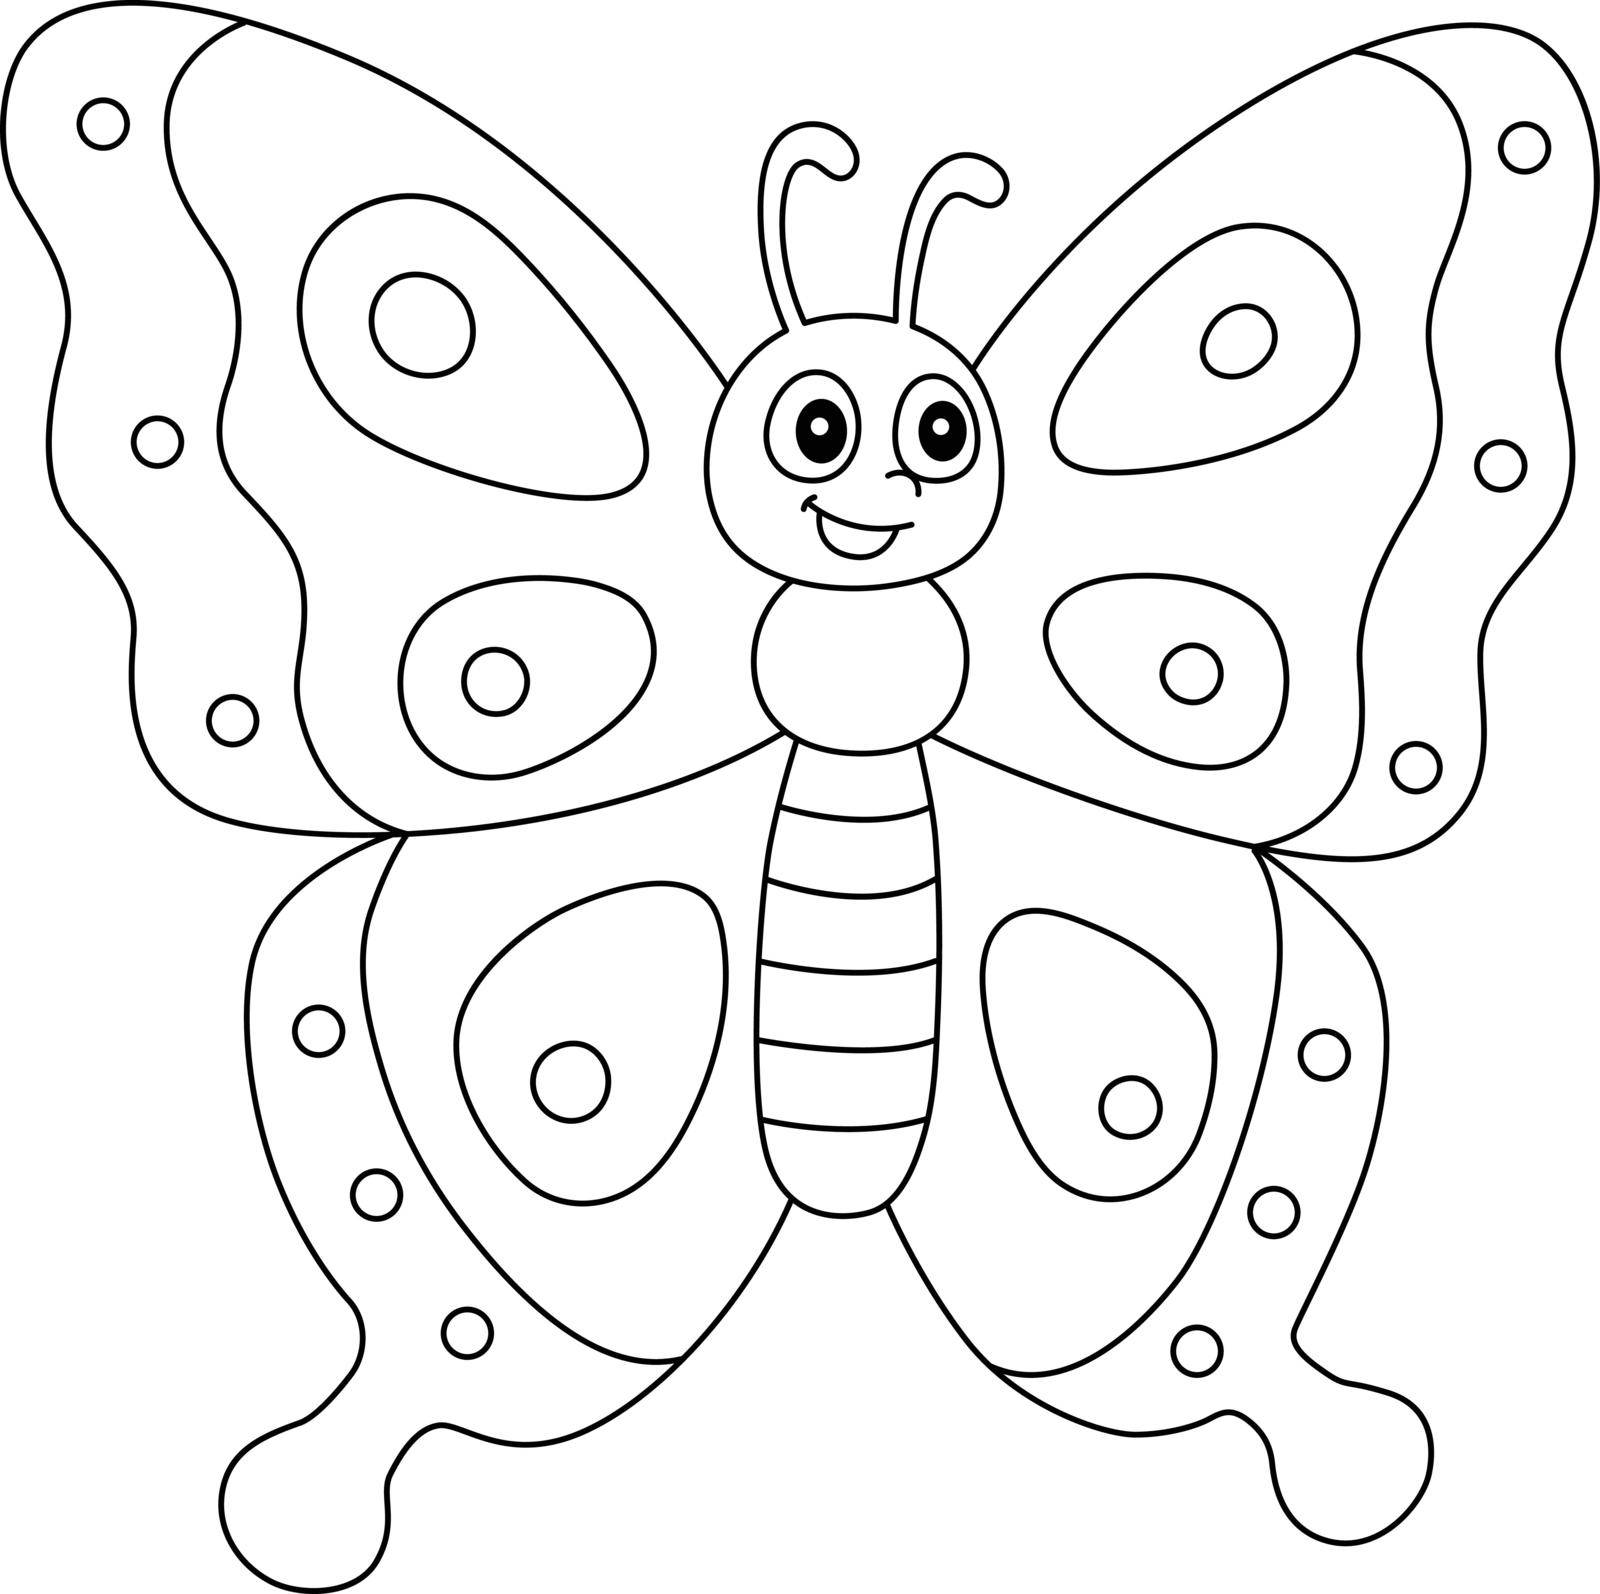 A cute and funny coloring page of a butterfly farm animal. Provides hours of coloring fun for children. To color, this page is very easy. Suitable for little kids and toddlers.